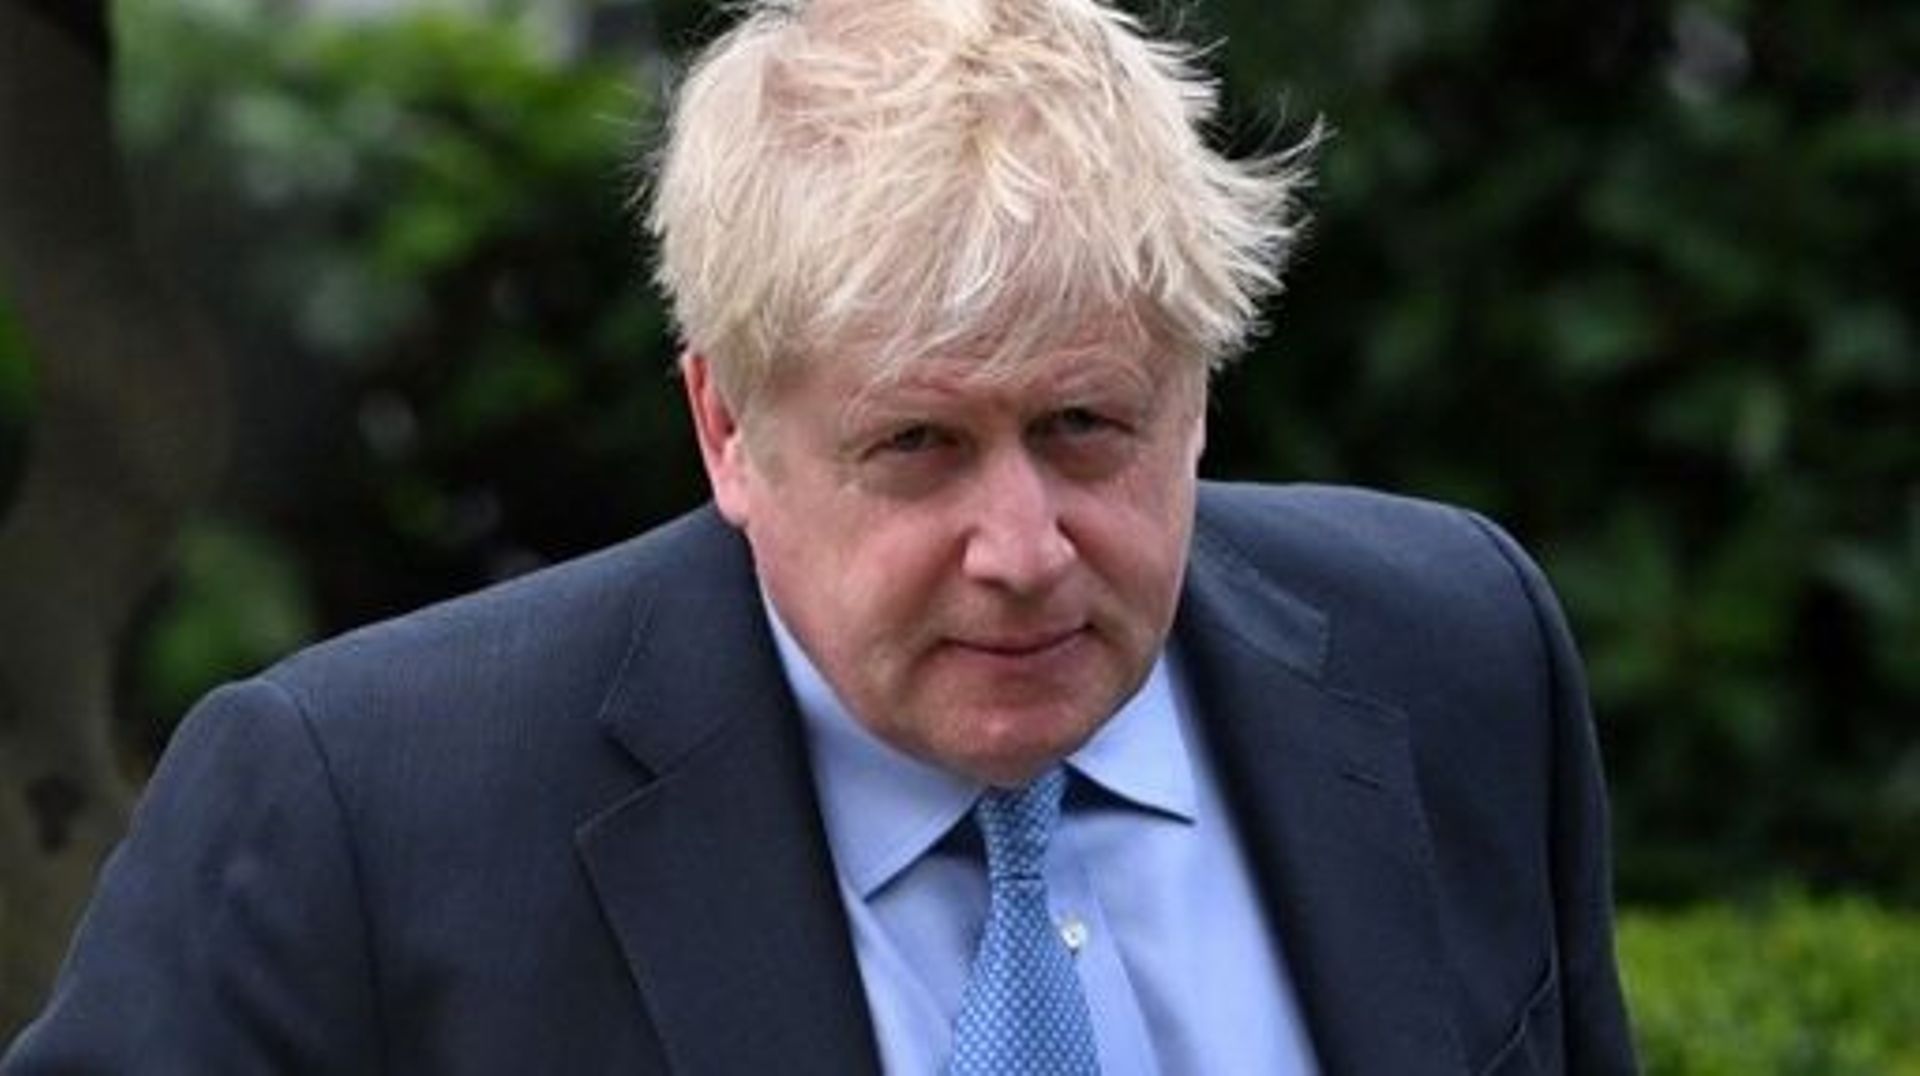 Former British Prime Minister Boris Johnson leaves his house in London on March 22, 2023. Britain’s former prime minister Boris Johnson re-enters the bear pit of parliamentary inquisition on Wednesday for a grilling about "Partygate" that could decide his